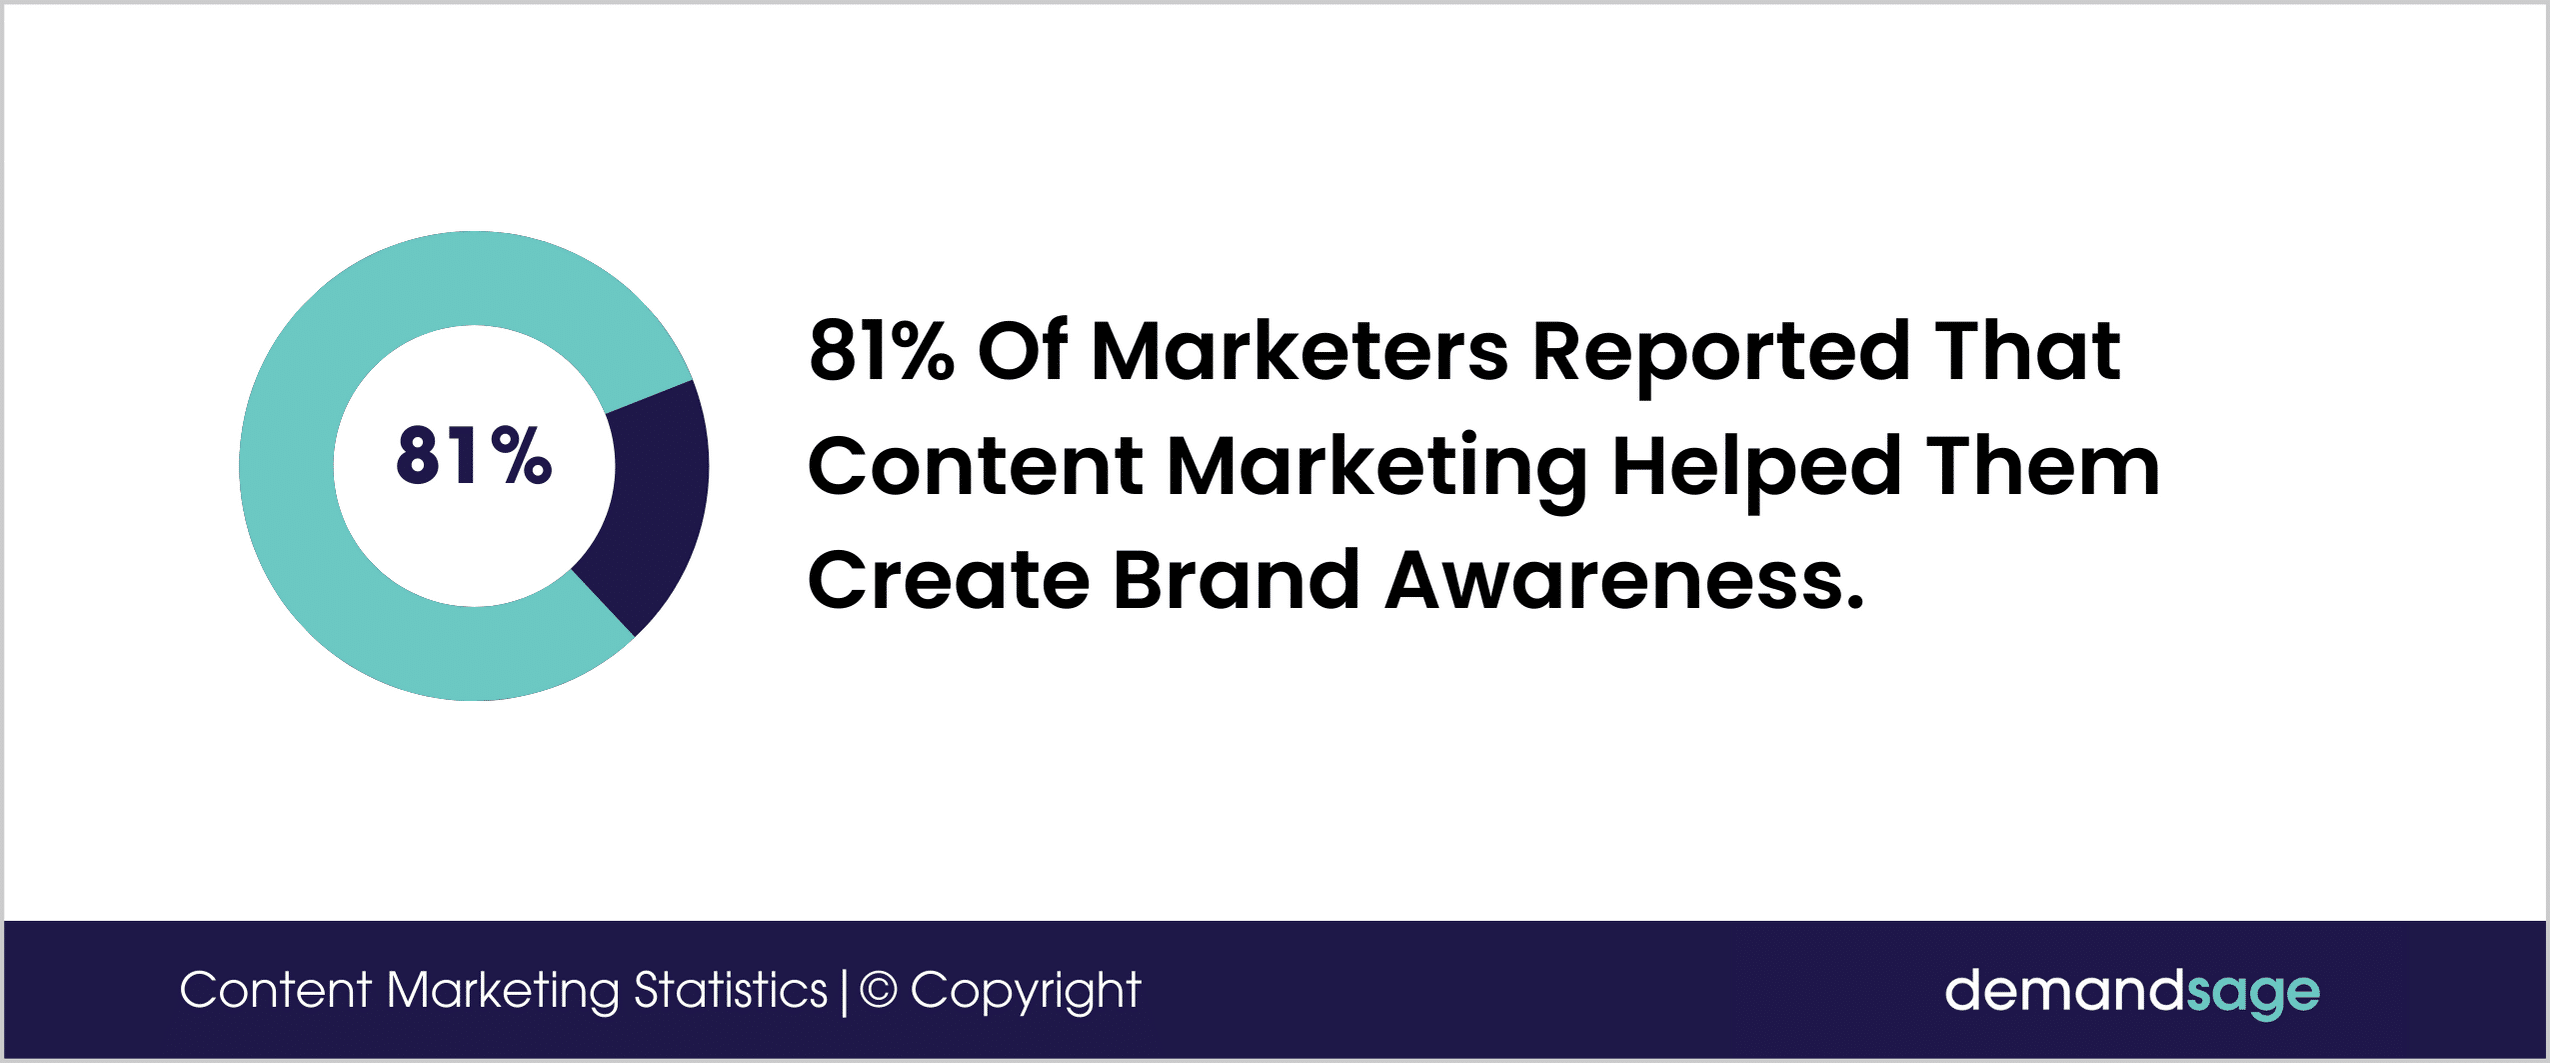  Content Marketing Helped To Create Brand Awareness